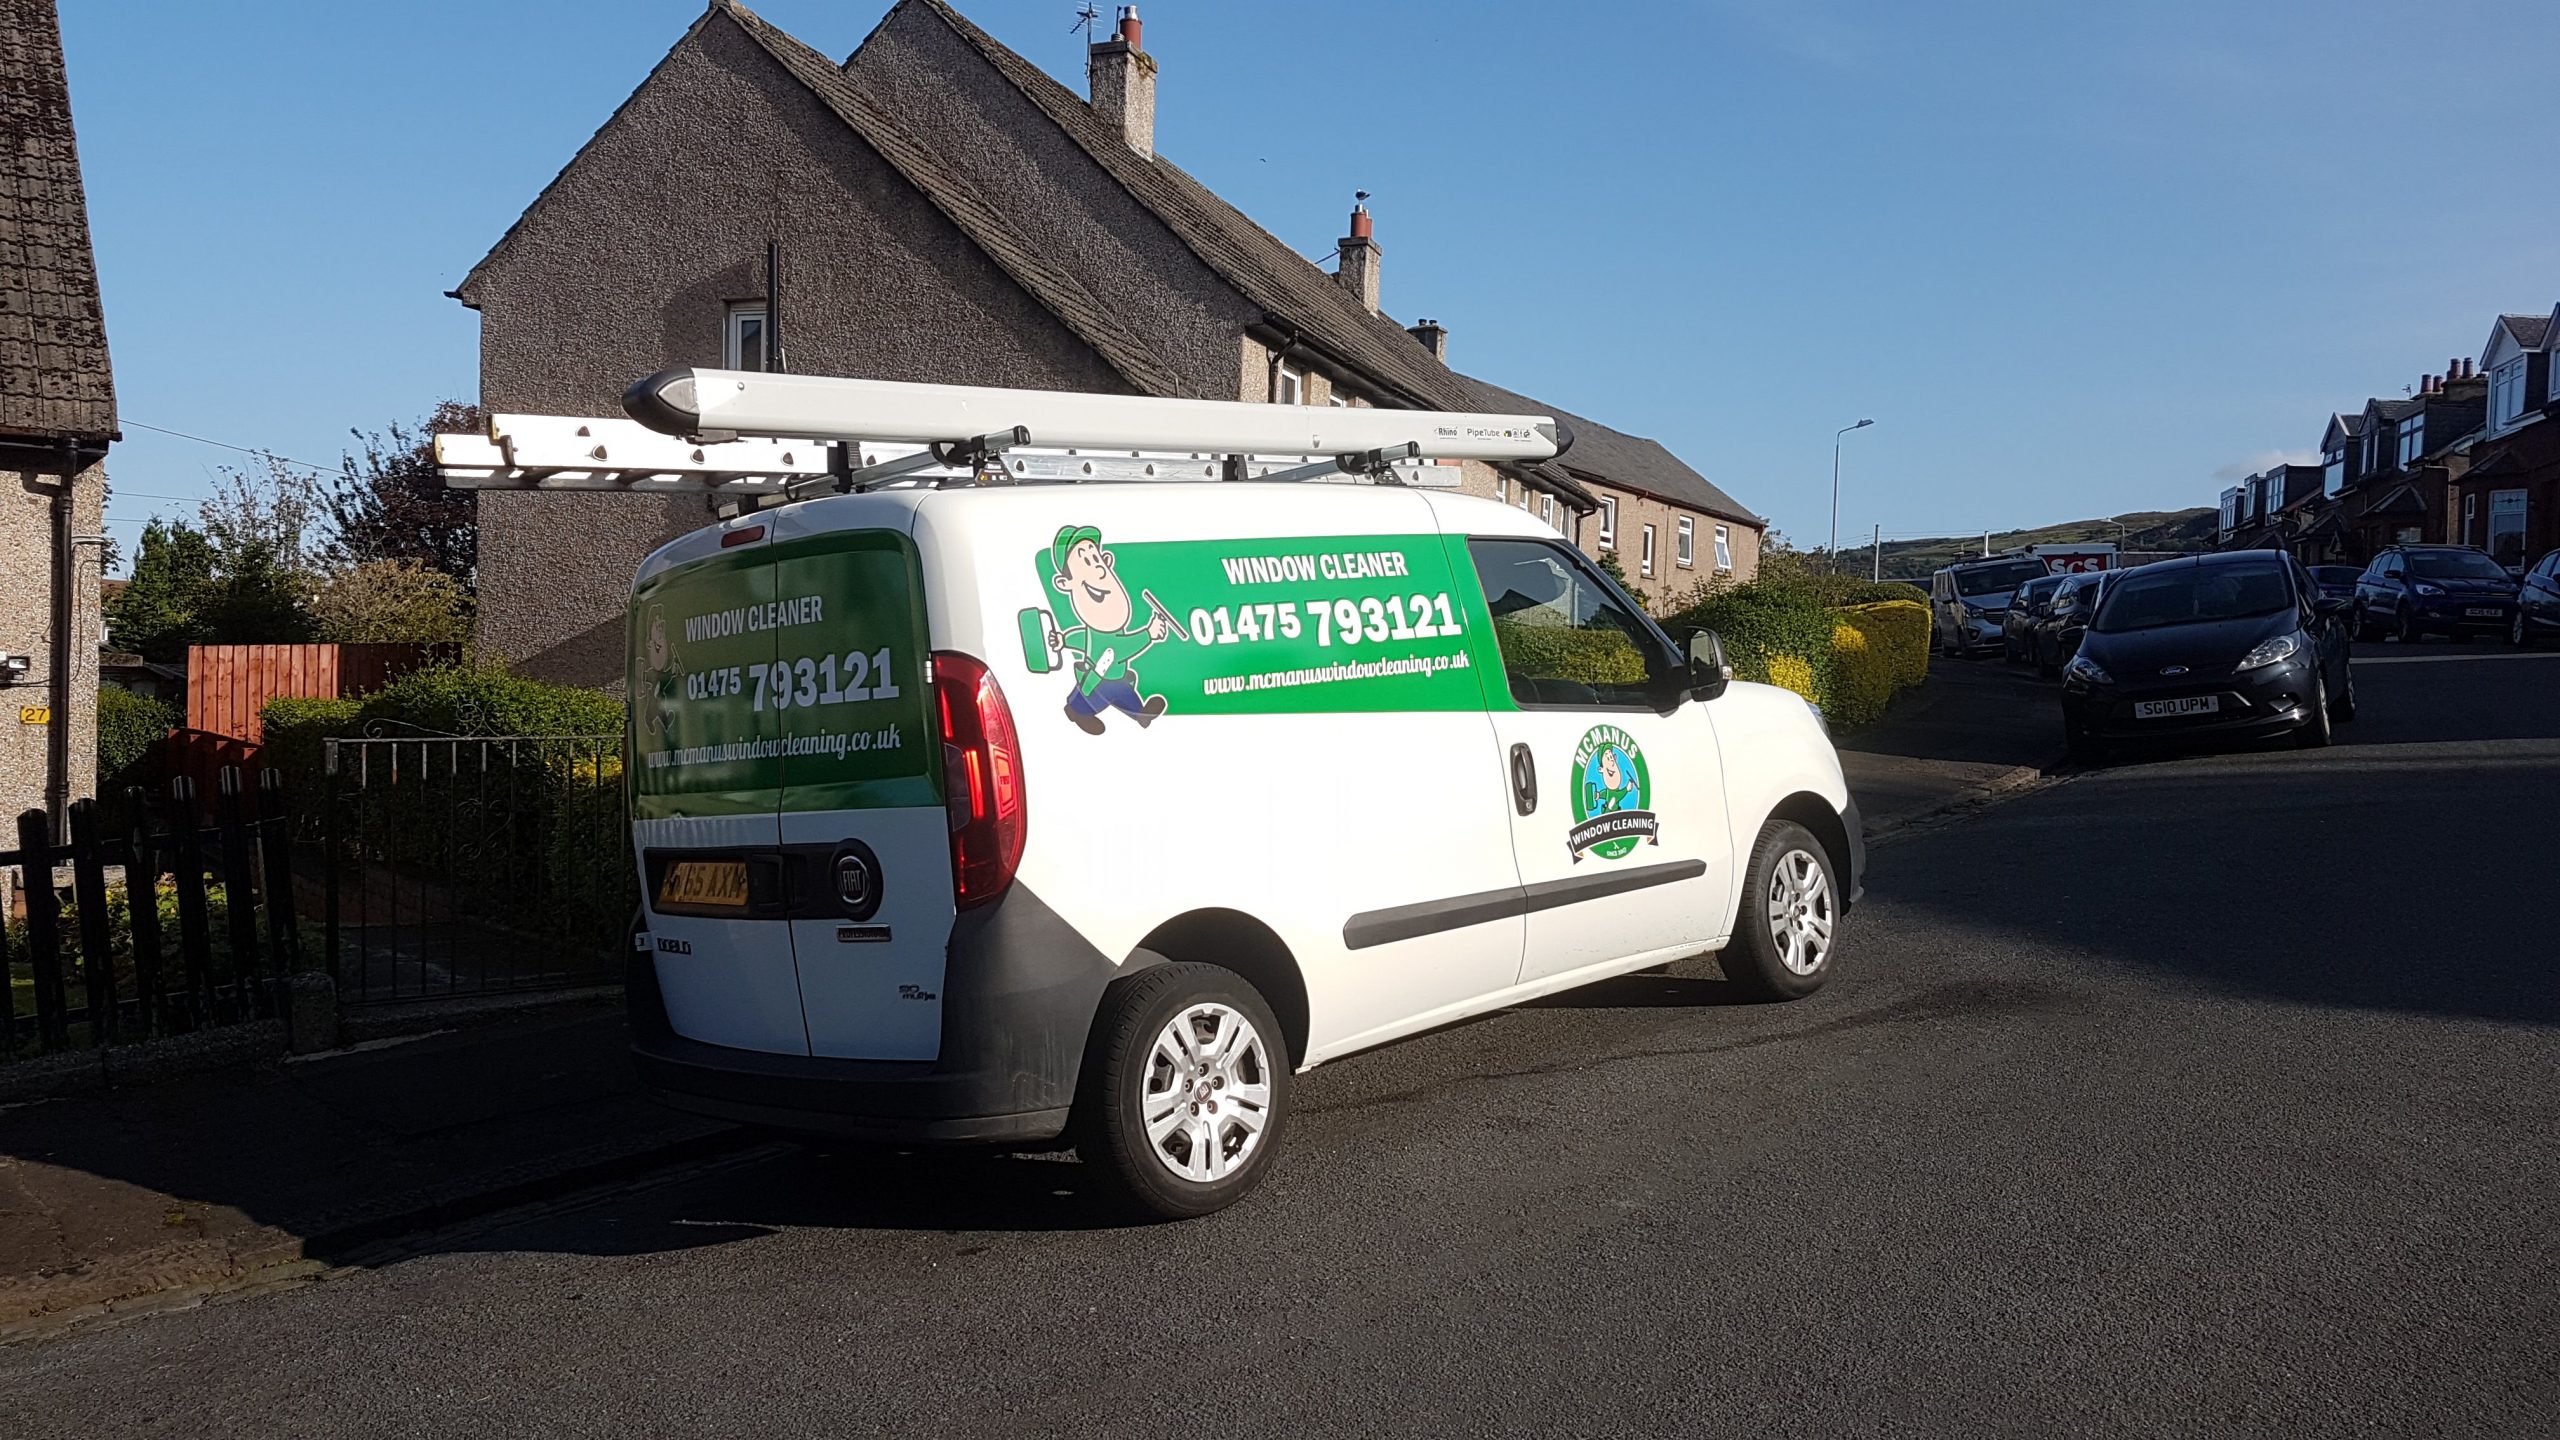 This is an image of one of our vans